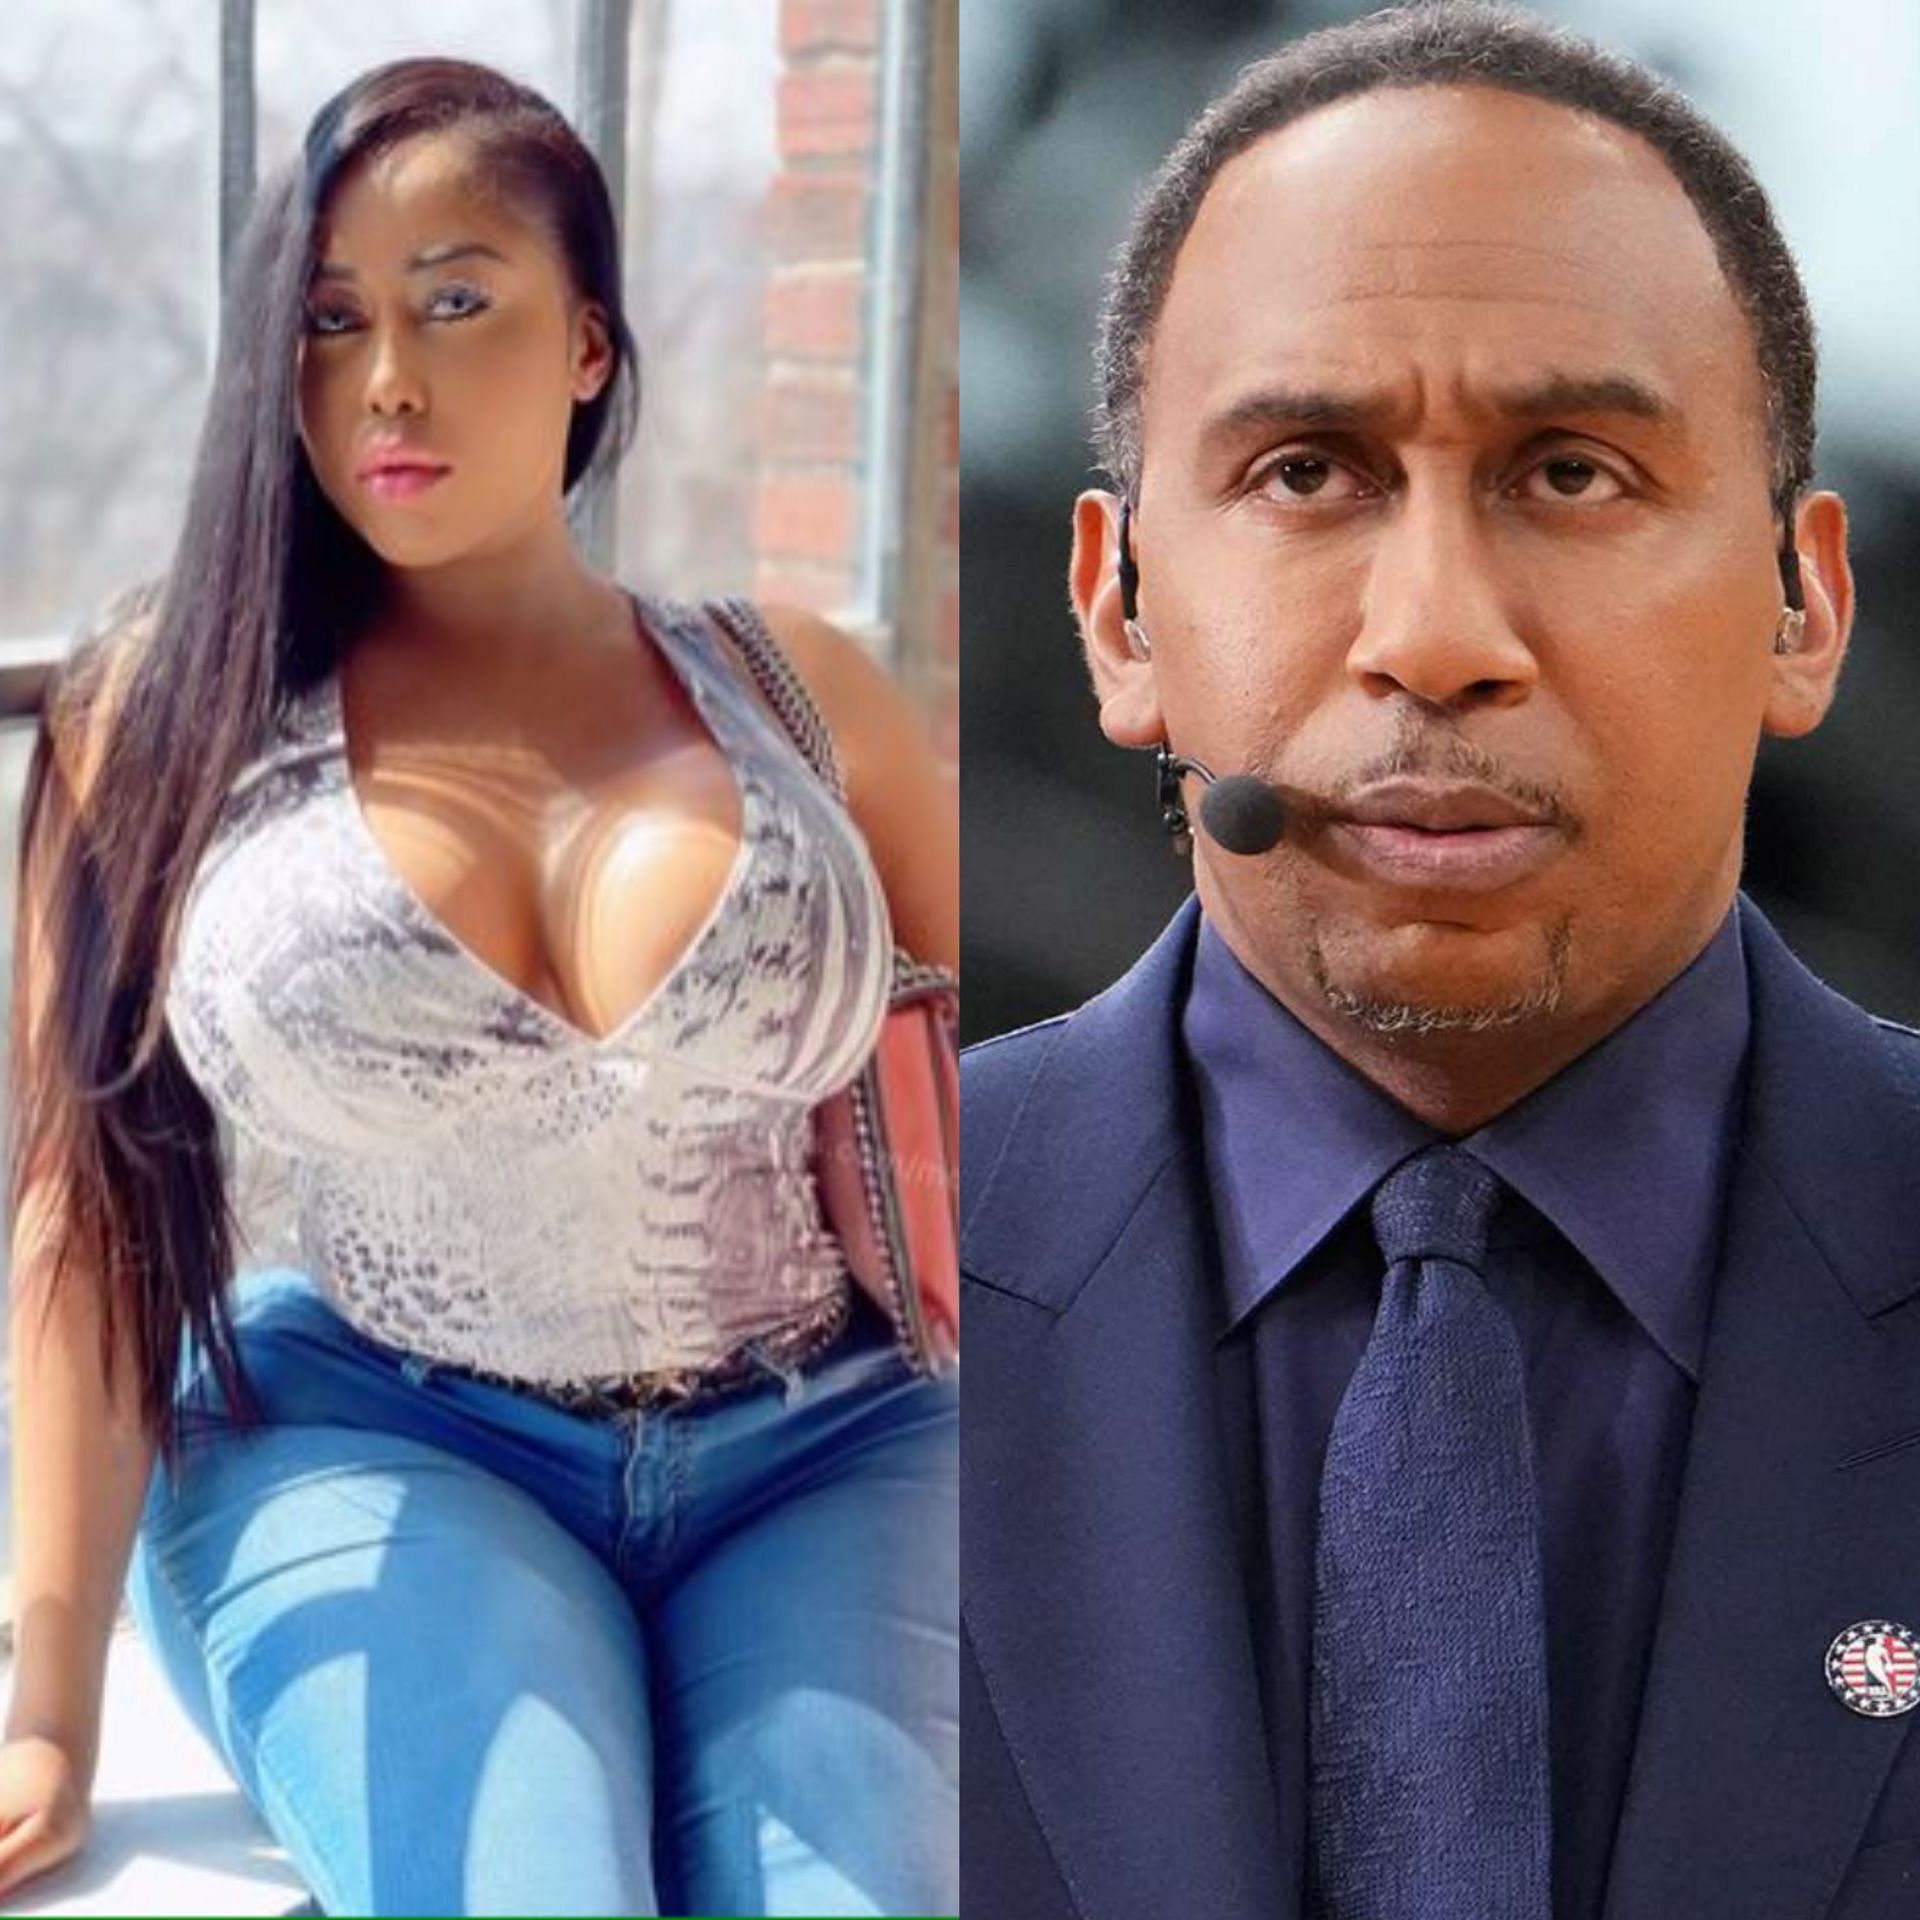 Stephen A.Smith went on a rant about Moriah Mills